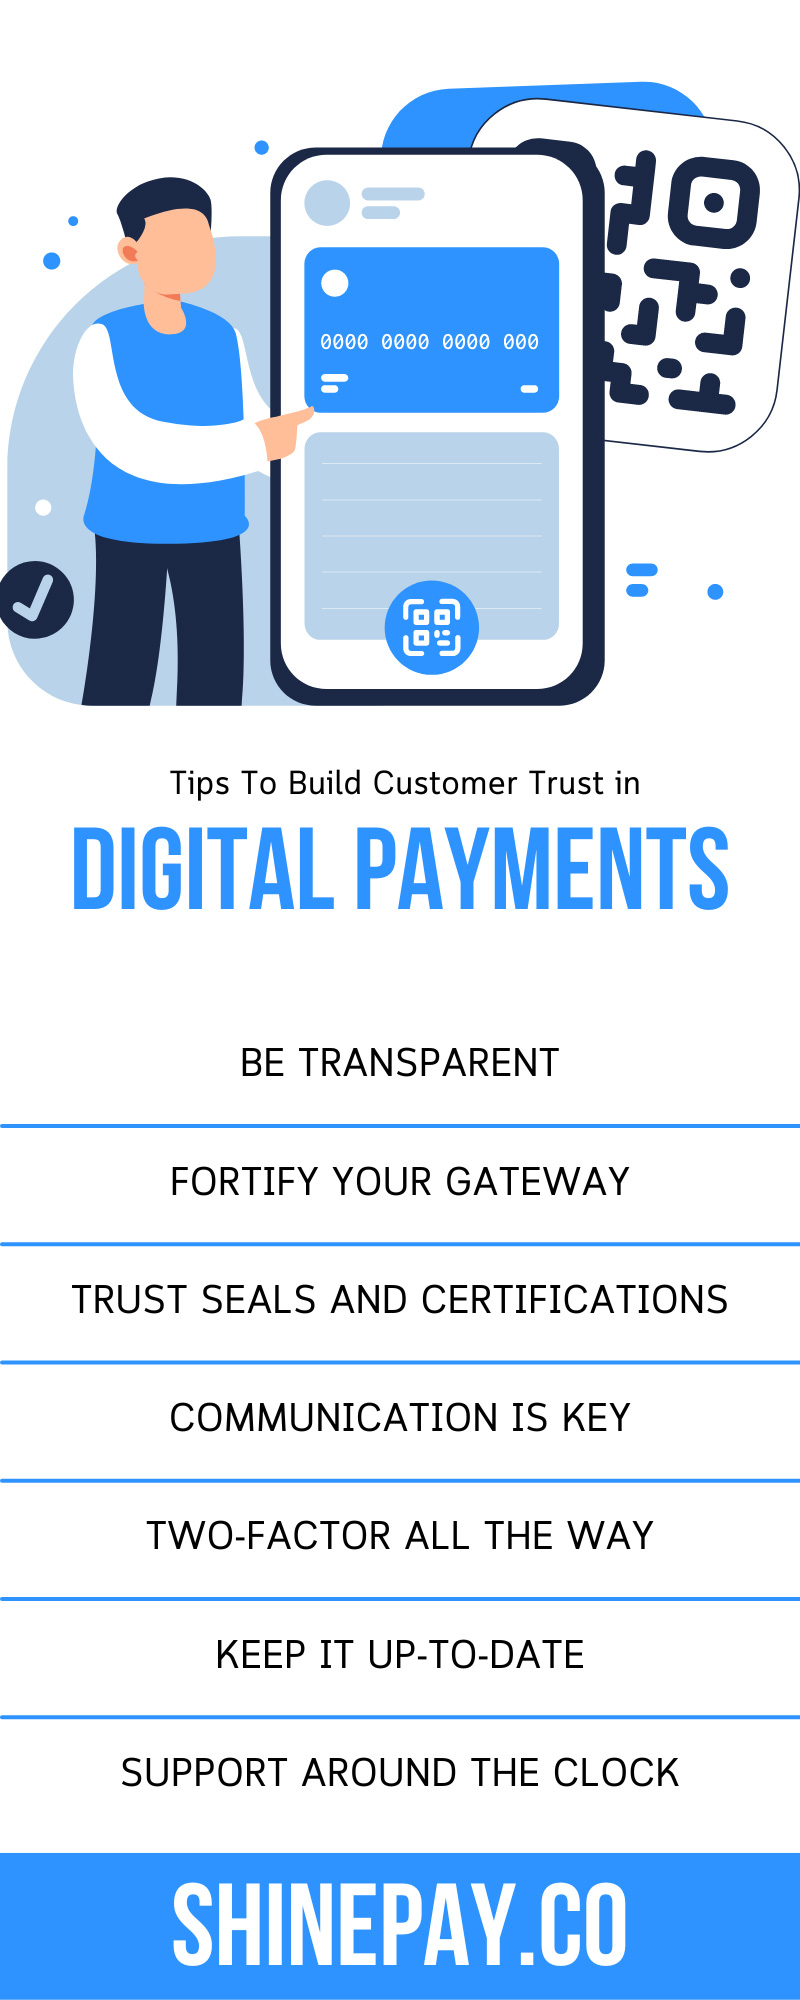 10 Tips To Build Customer Trust in Digital Payments